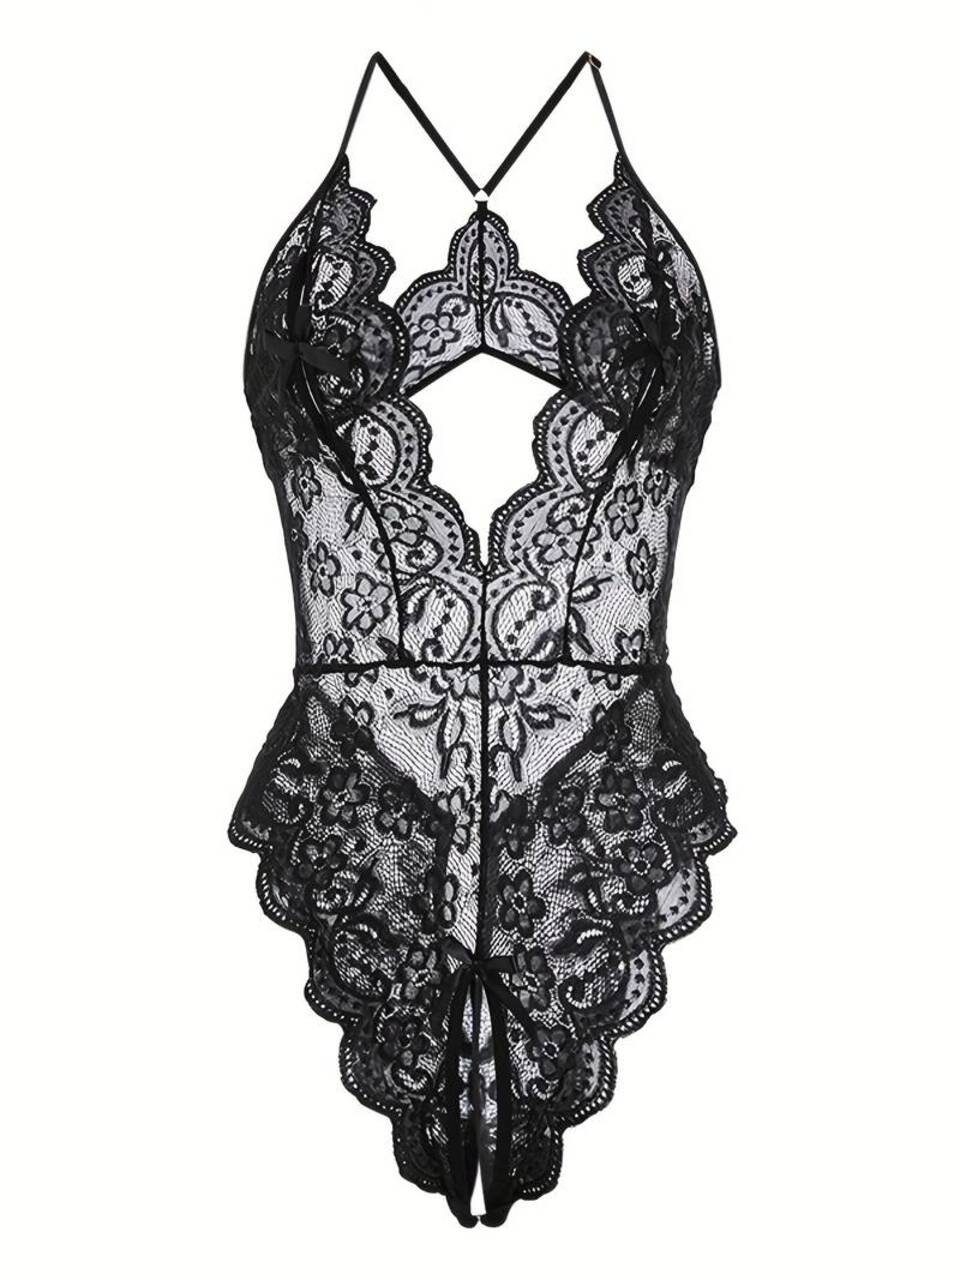 Body ouvert, sexy lace body with open crotch, lingerie with crossed back (set, 1 piece) lingerie with floral lace &amp; bow, erotic women's underwear 